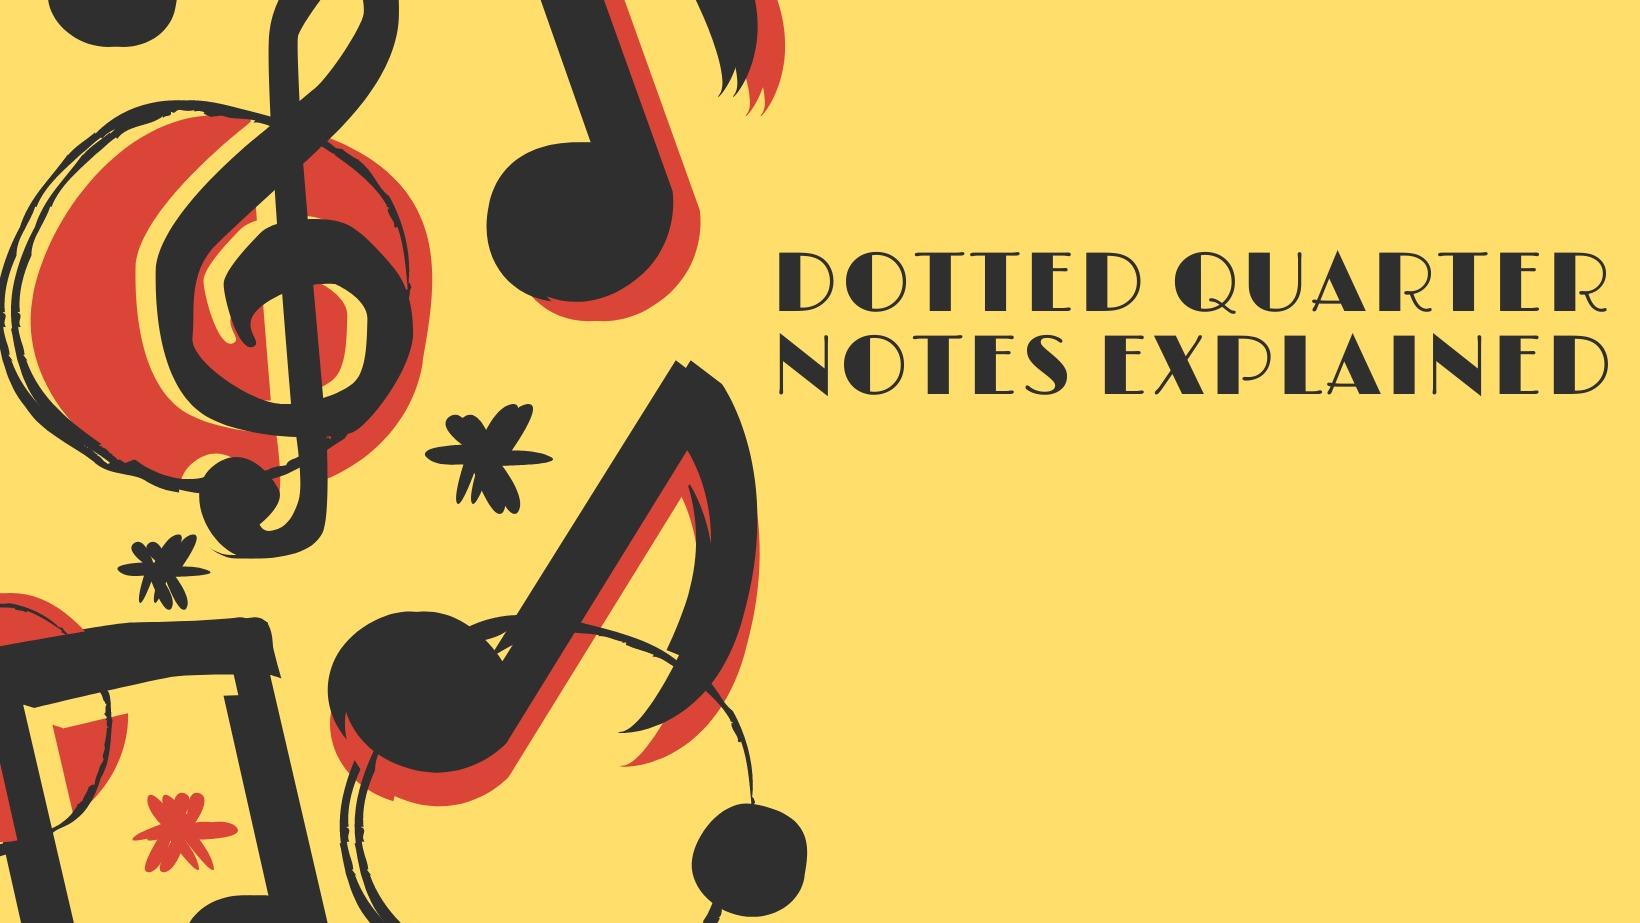 Dotted Quarter Note Explained